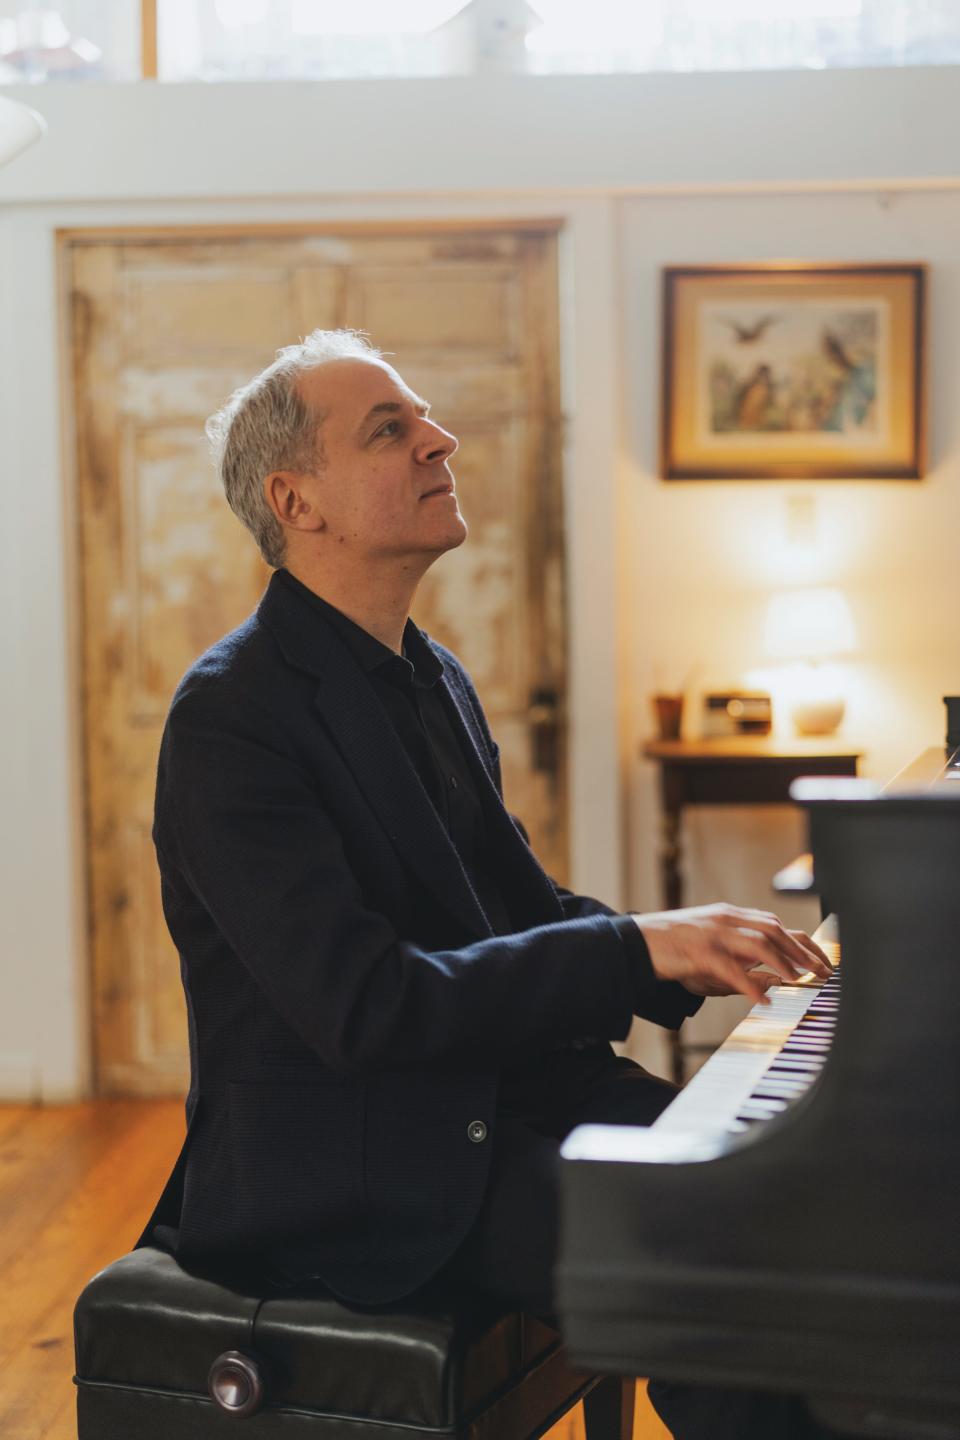 Acclaimed pianist Jeremy Denk playing the Keyboard Partitas Friday March 21  as part of the The Bach Birthday Bash celebration.